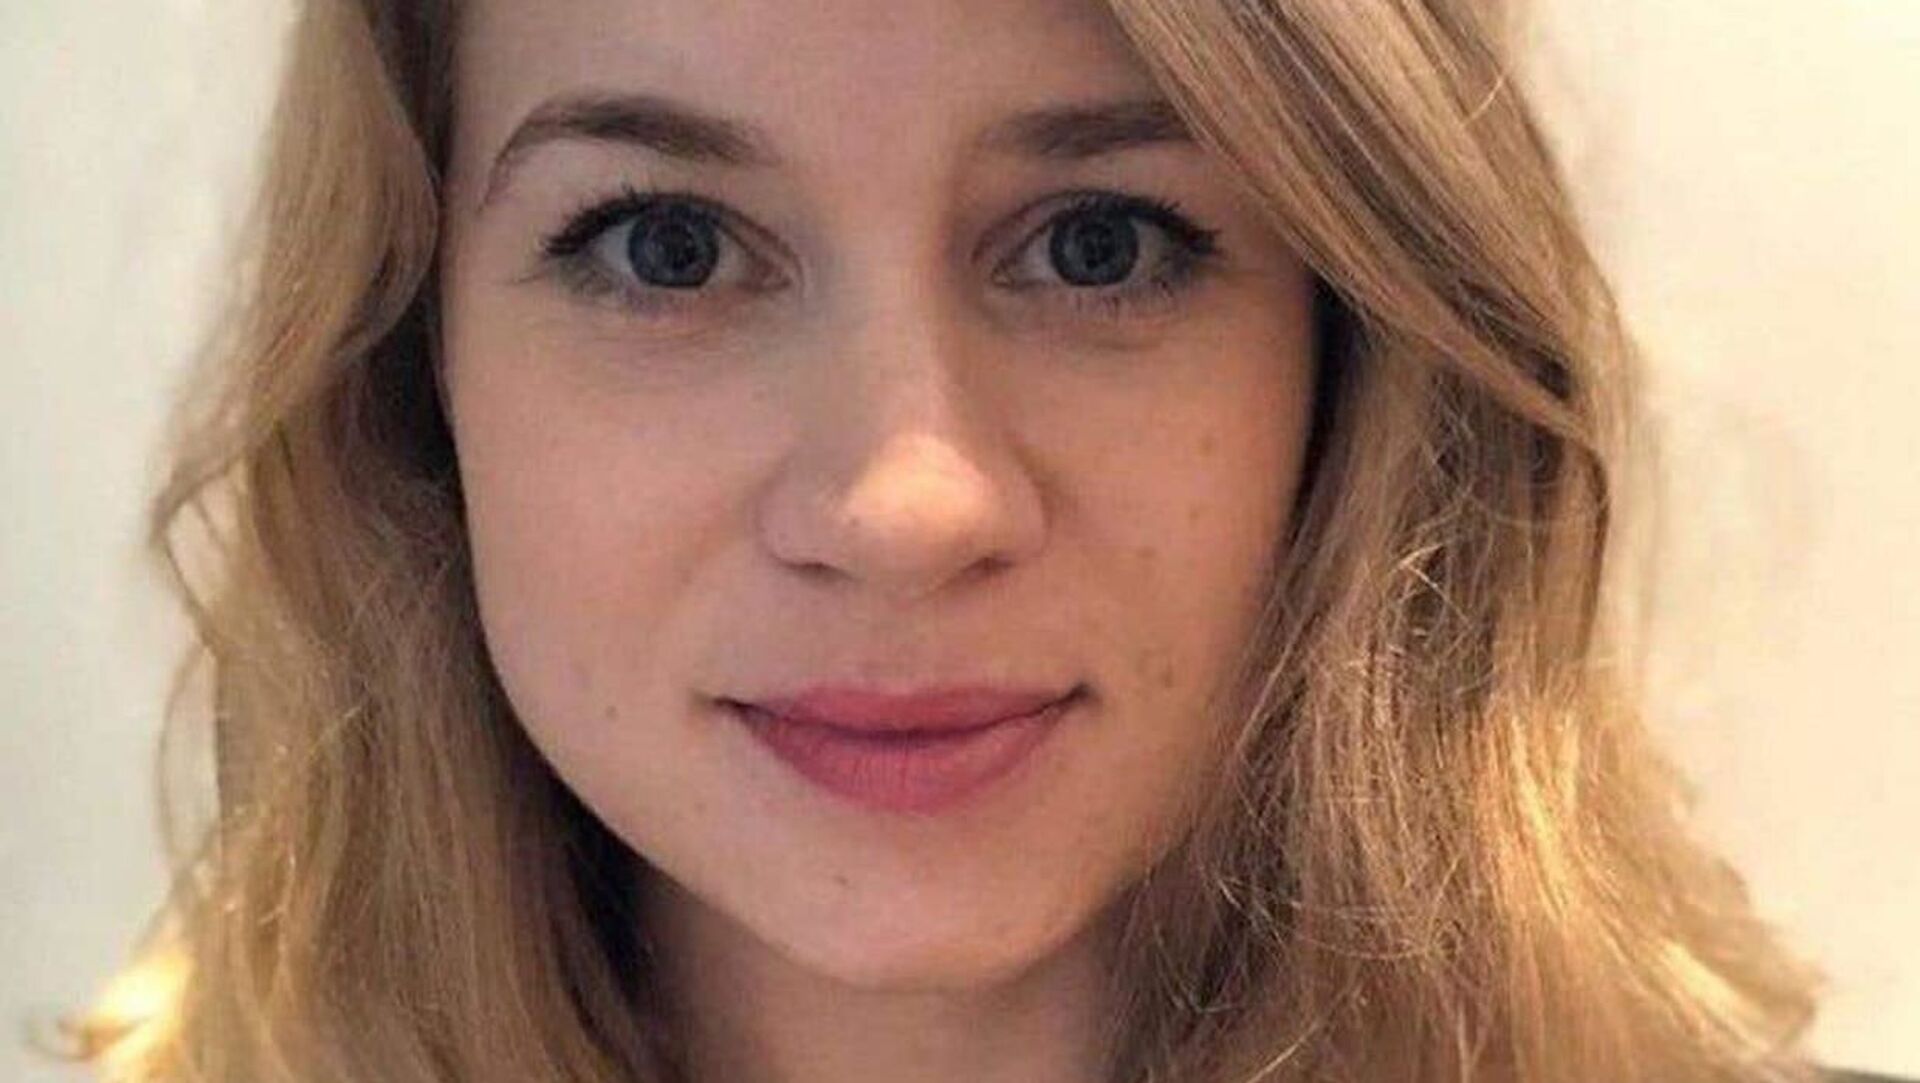 UK Police Officer Charged With Kidnapping, Murder of Sarah Everard - Sputnik International, 1920, 12.03.2021